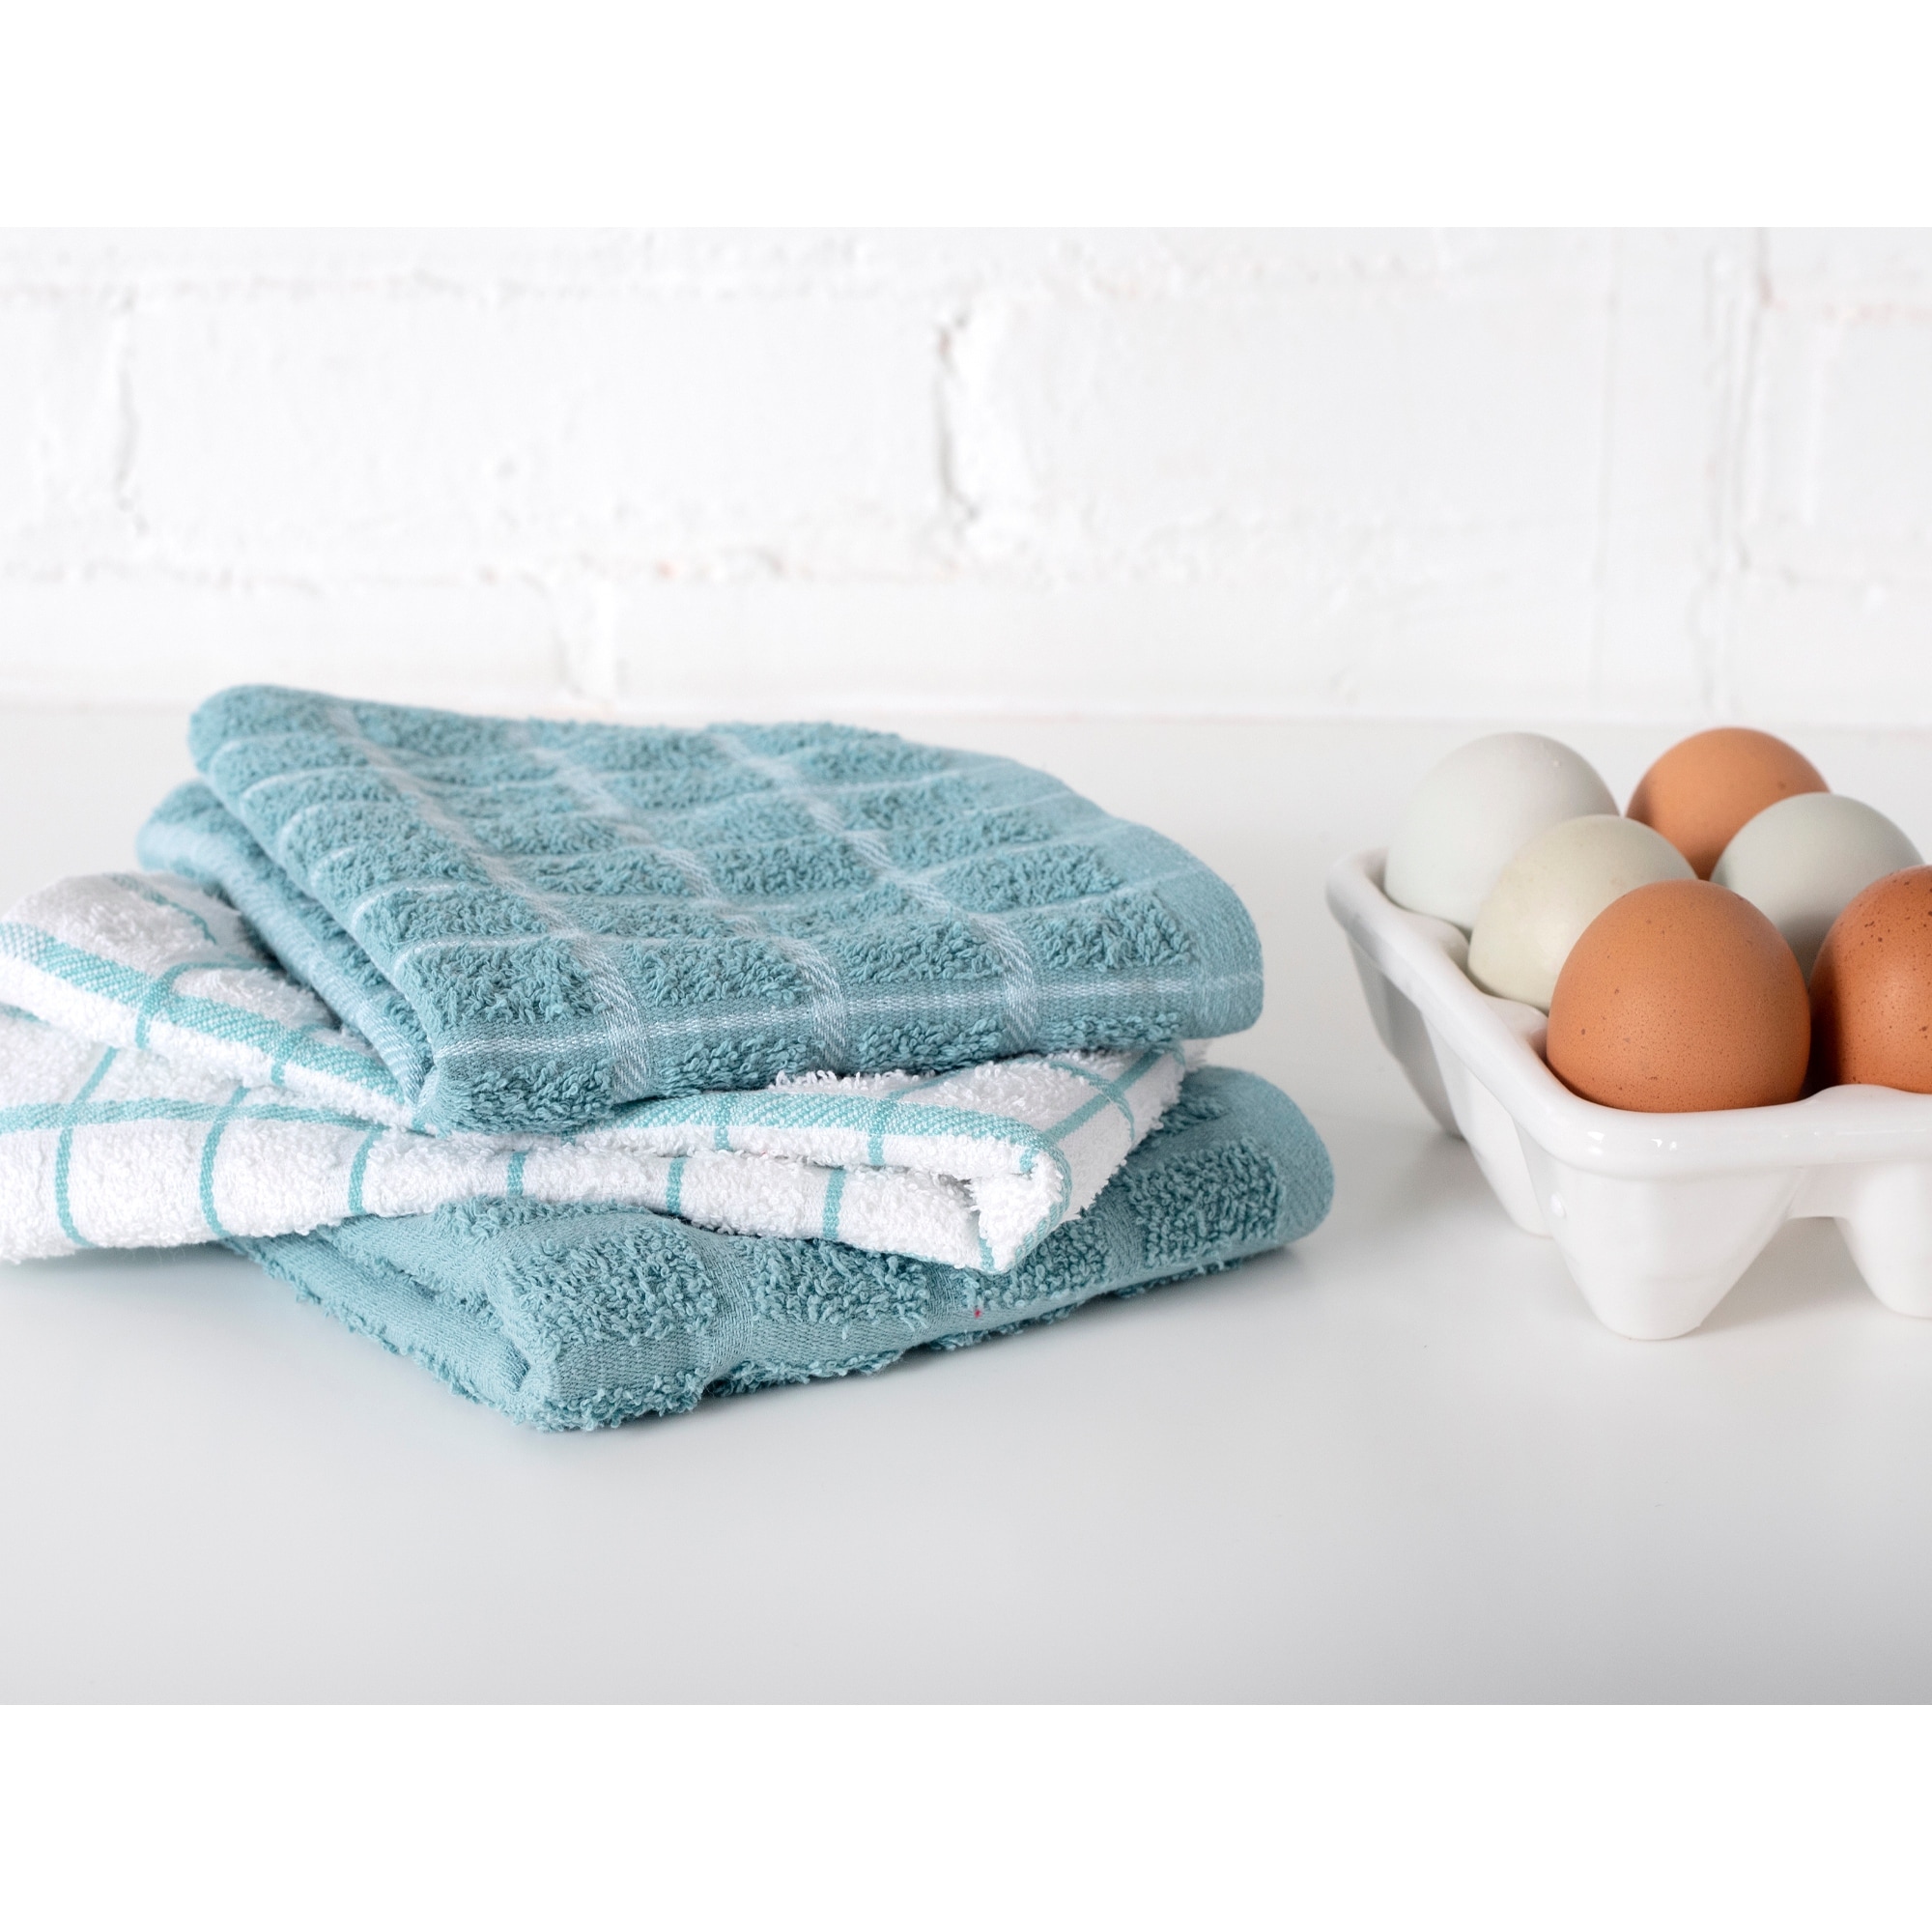 https://ak1.ostkcdn.com/images/products/is/images/direct/69b71d2166ac9bcd7be711f204b8d0f1dd0f3c1e/RITZ-Terry-Check-Kitchen-Towel%2C-Set-of-3.jpg